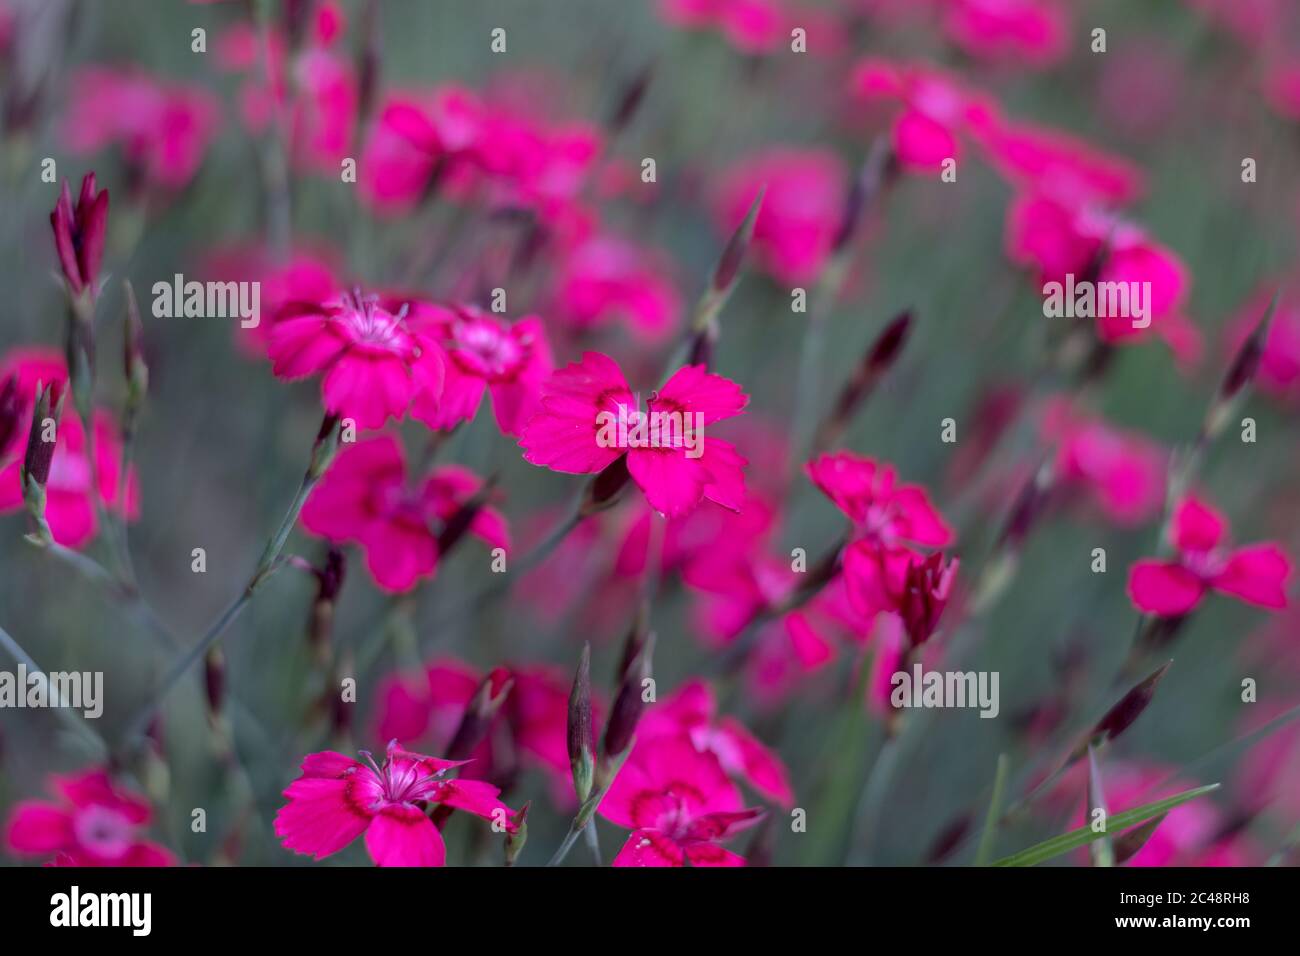 Dianthus deltoides, the maiden pink - pink flowers in the garden Stock Photo